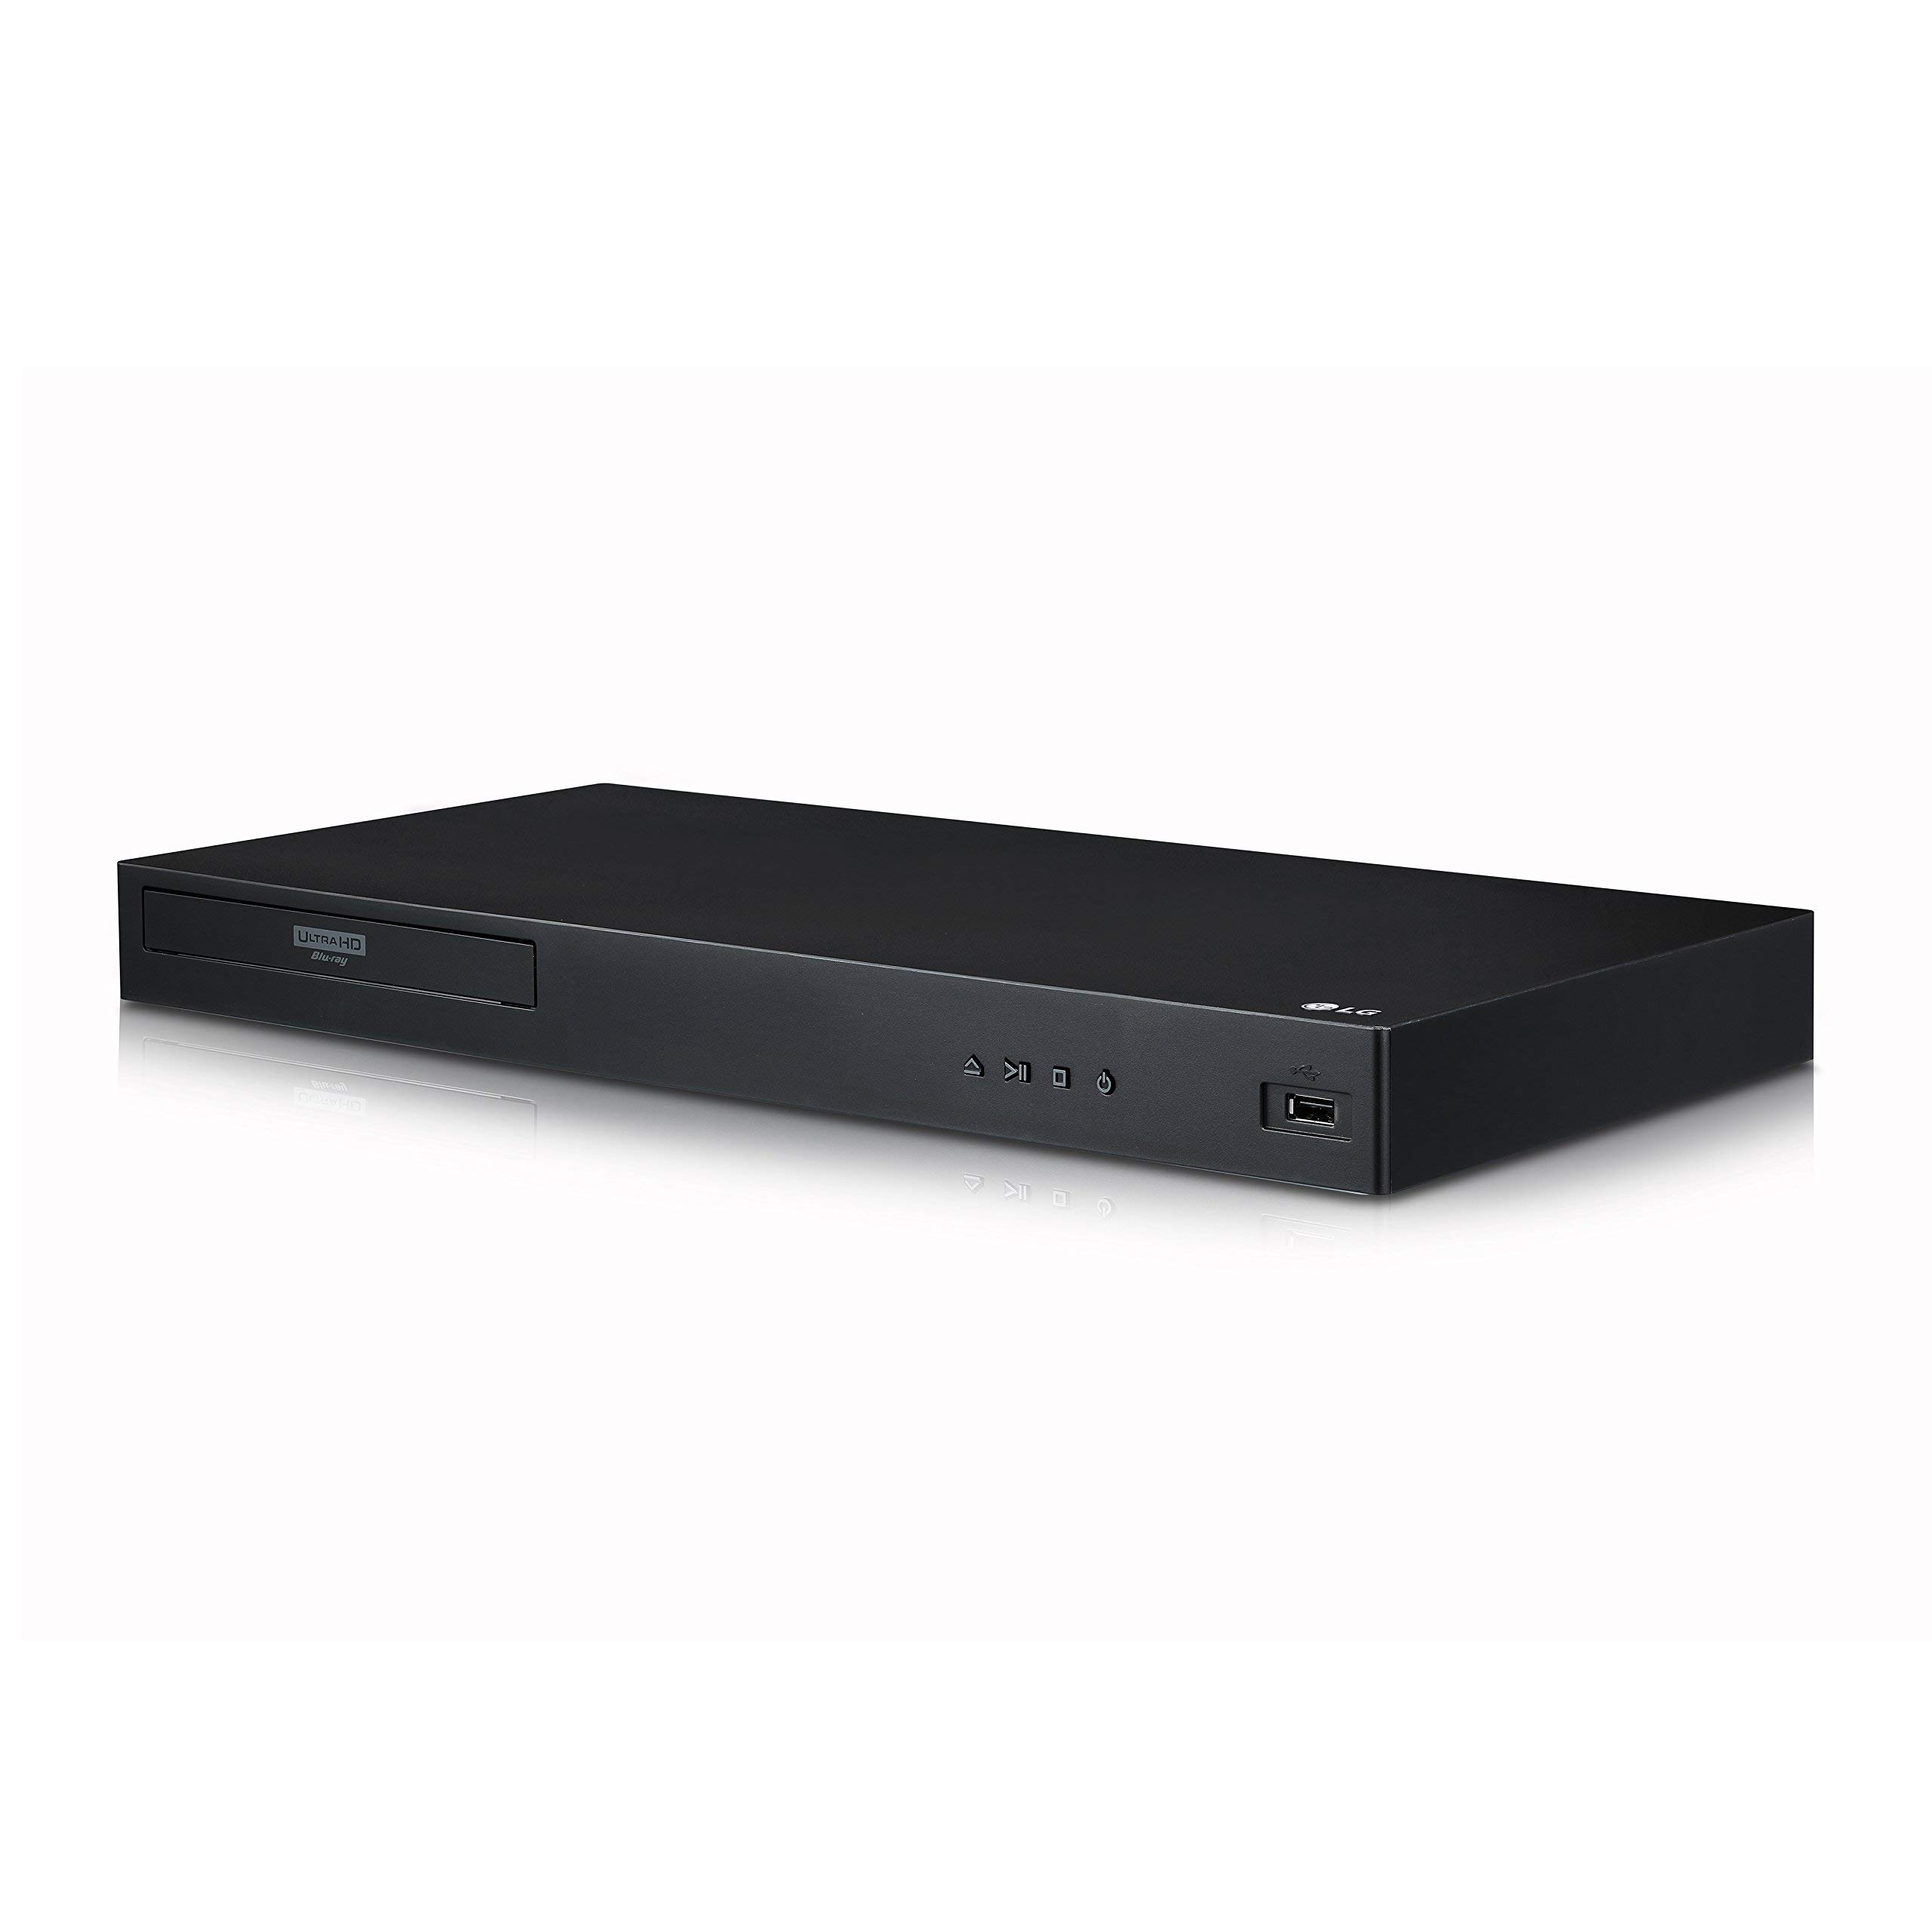 LG UBK80 4K Ultra-HD Blu-ray Player with HDR Compatibility (2018) (Renewed)